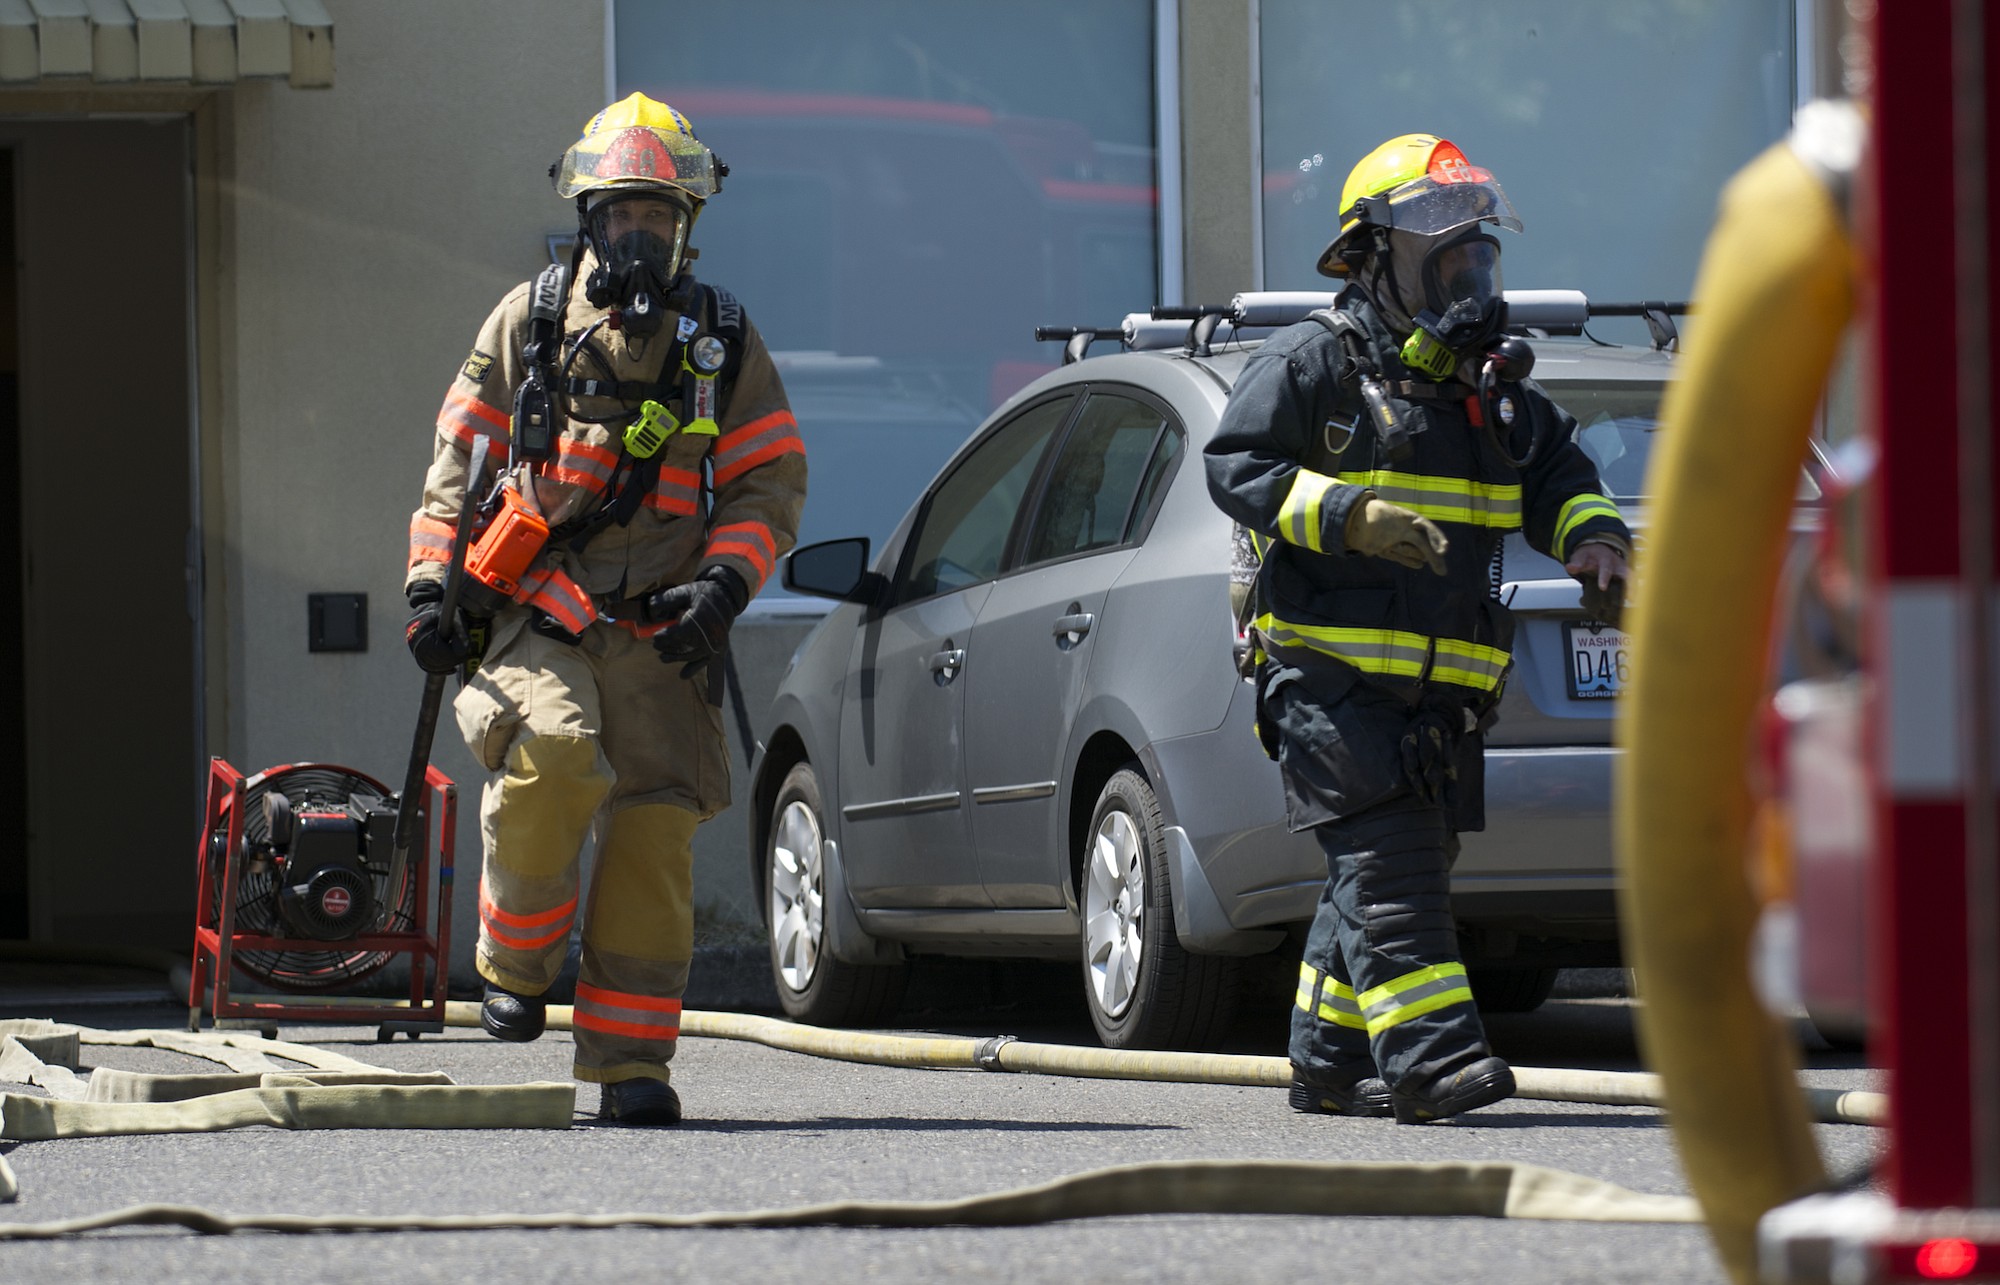 Firefighters battle a small fire Tuesday, July 15, 2014 at the Town Plaza in Vancouver, the former Tower Mall. The fire was reported around 1:30 p.m. at 5411 E. Mill Plain Blvd., which houses social services.